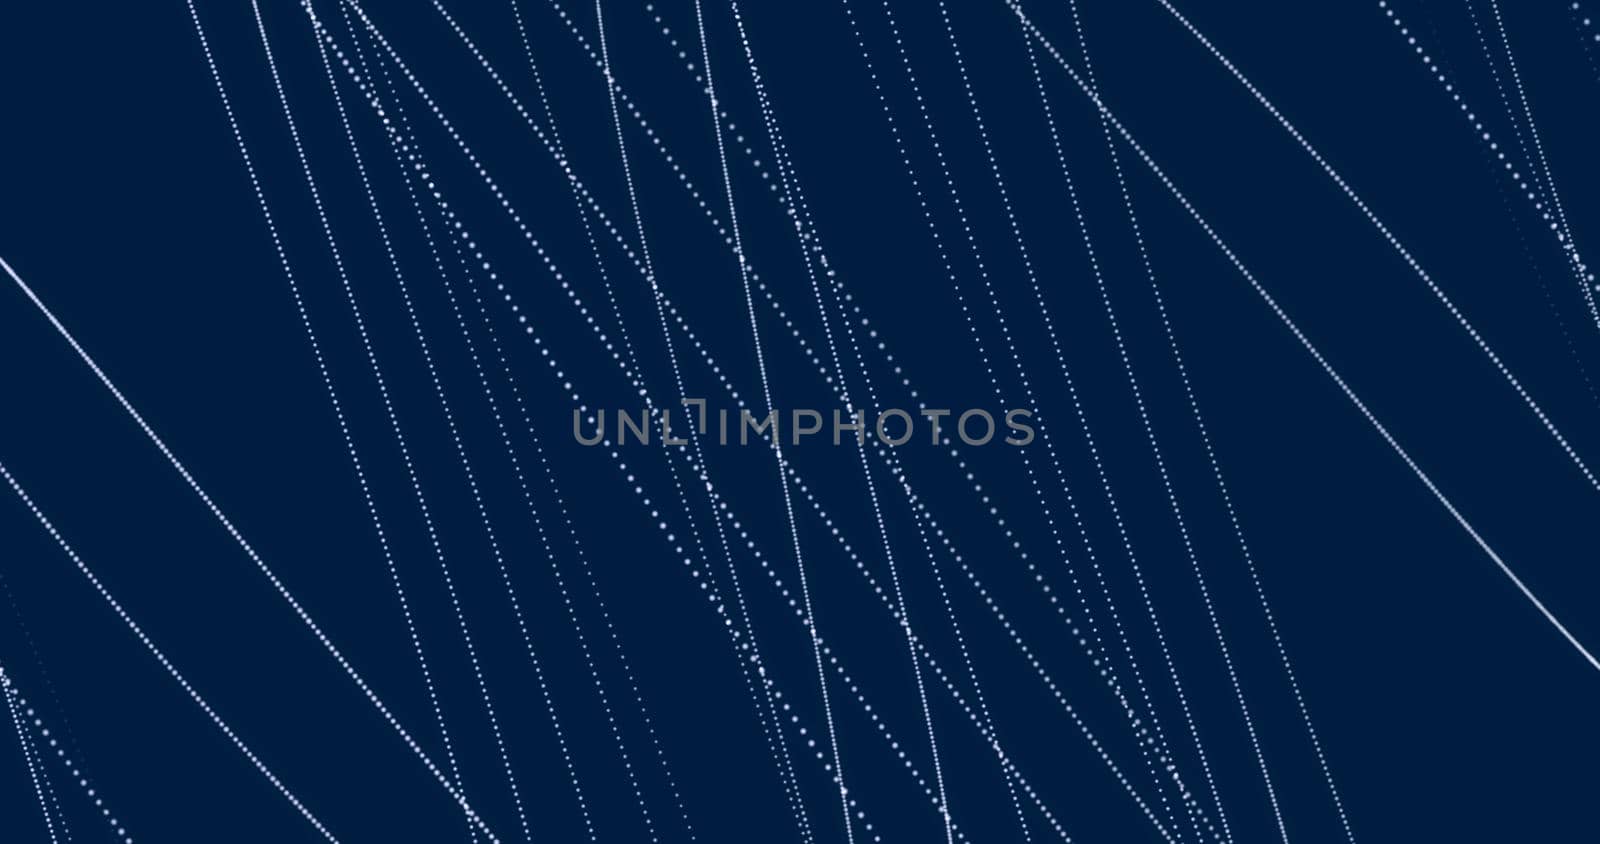 Abstract blue background with dynamic 3d lines. blue lines on a blue background. geometric background, copy space.